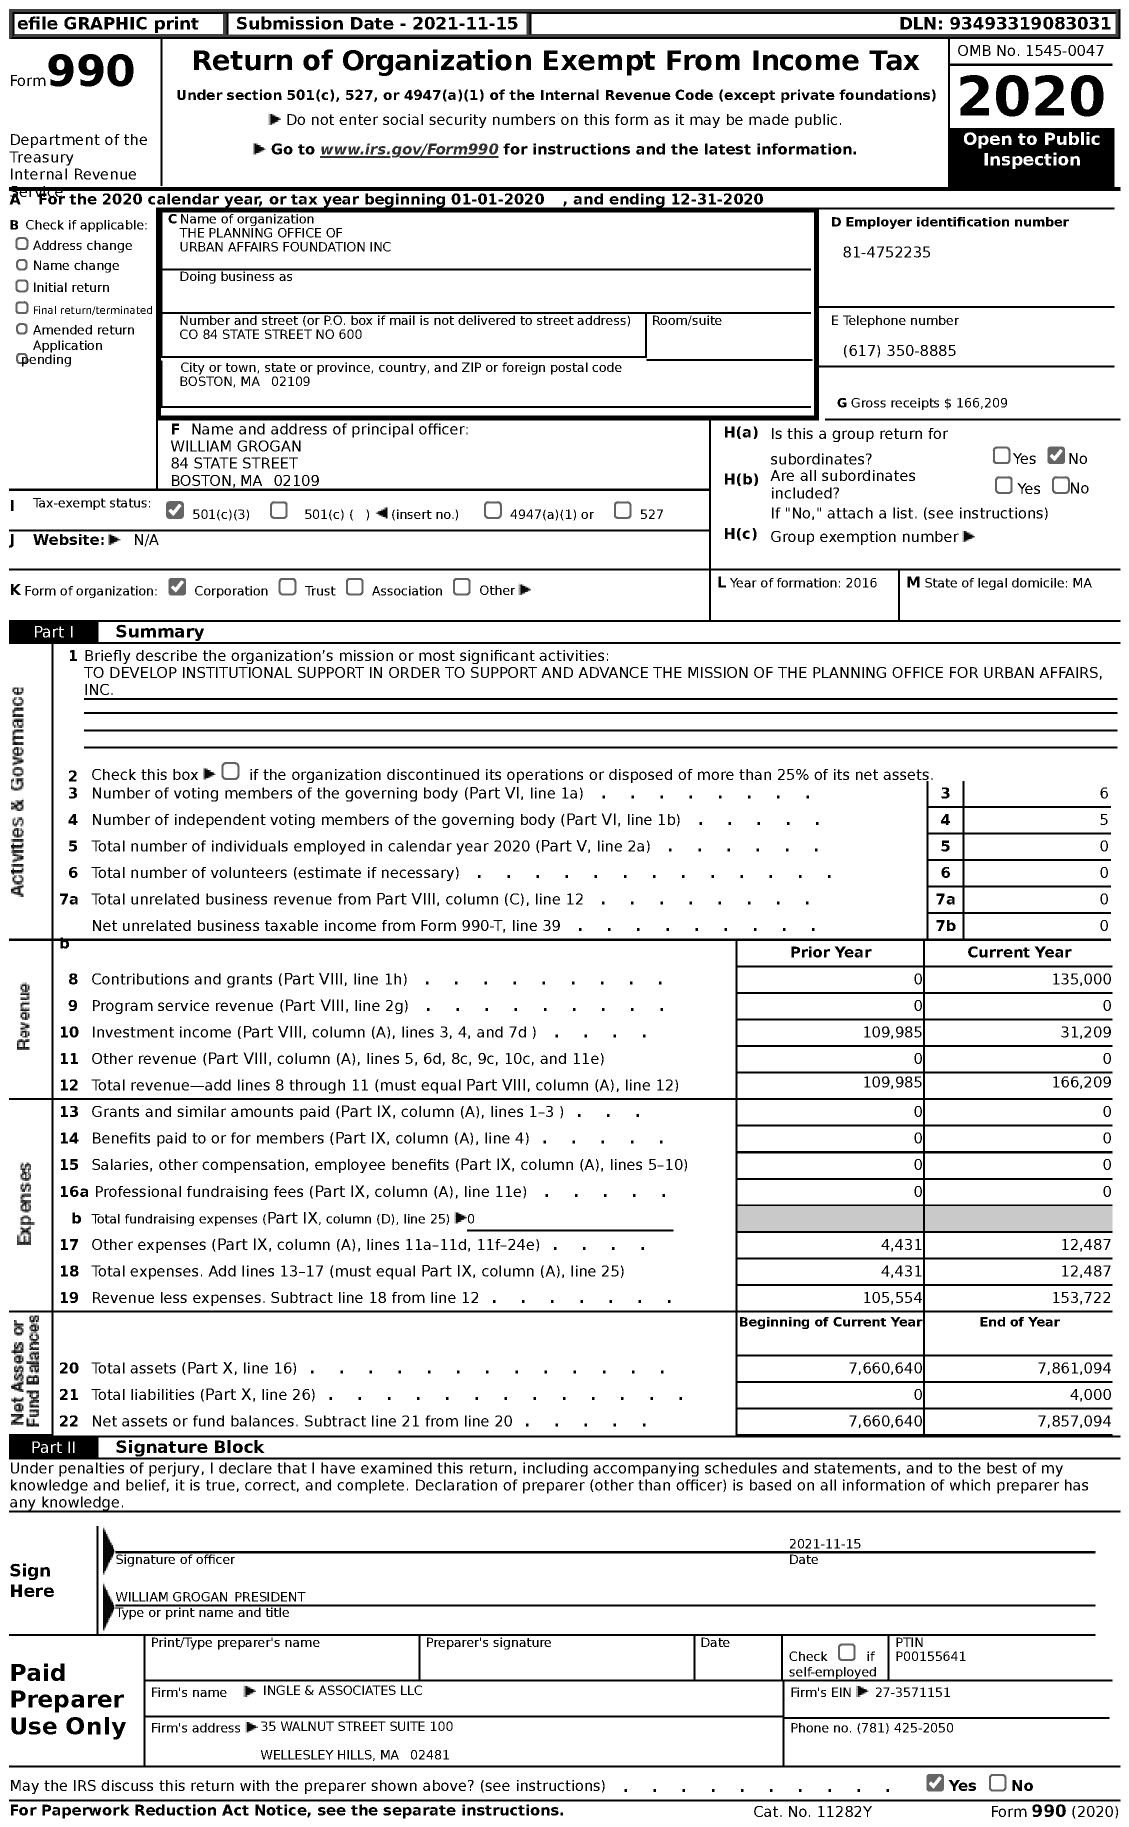 Image of first page of 2020 Form 990 for The Planning Office of Urban Affairs Foundation